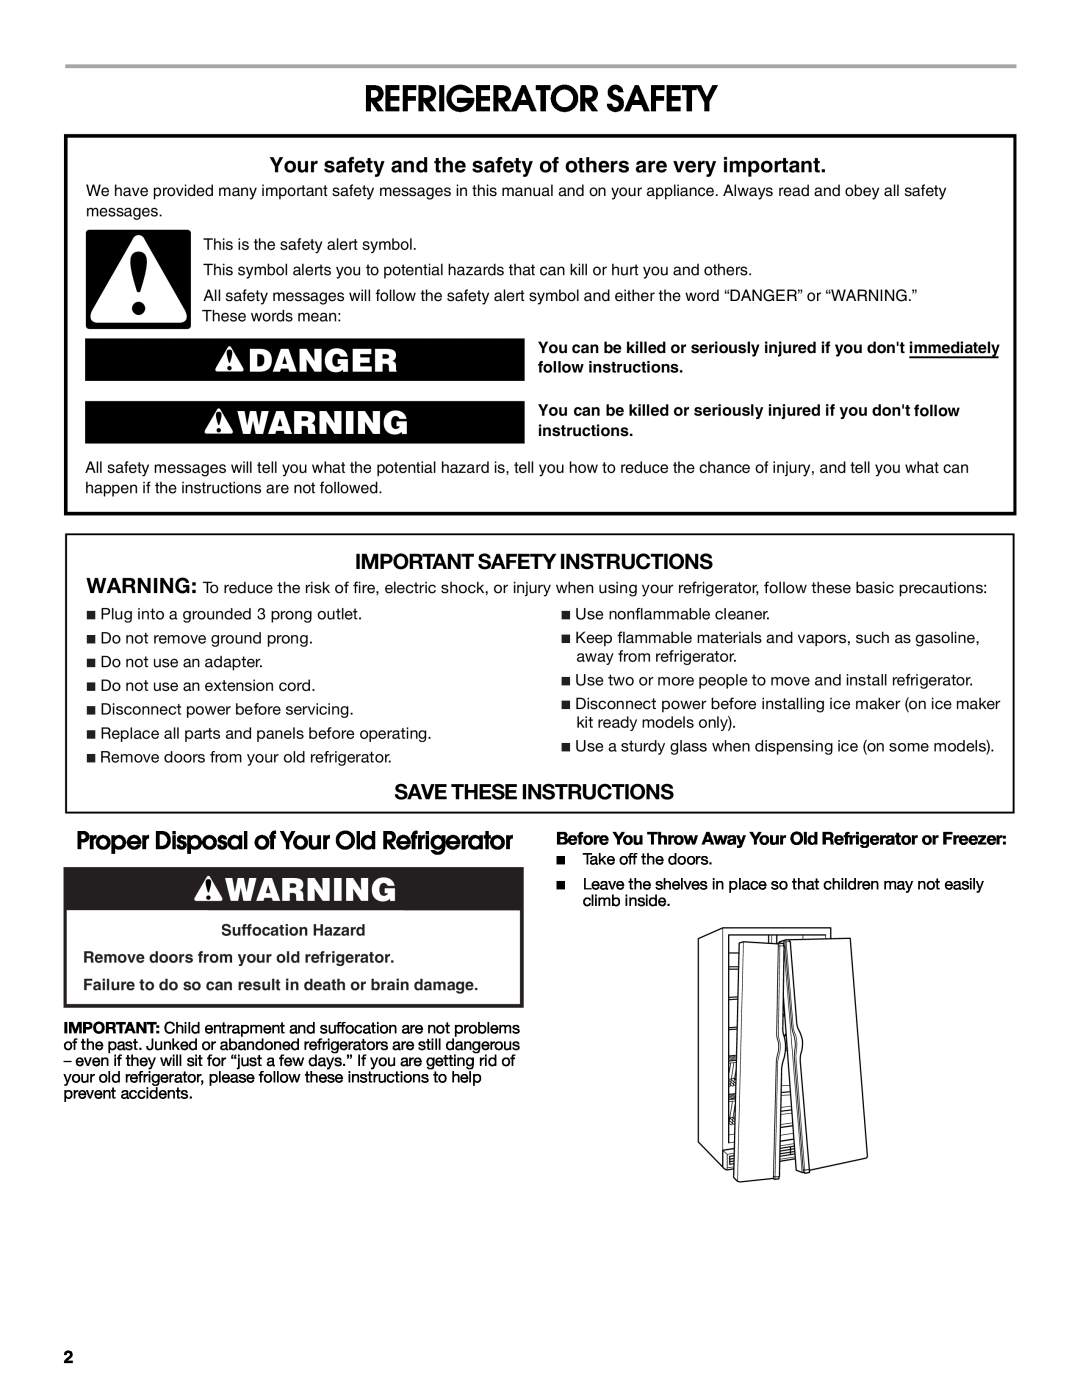 Crosley CS22AFXKB06 Refrigerator Safety, Danger, Proper Disposal of Your Old Refrigerator, Important Safety Instructions 